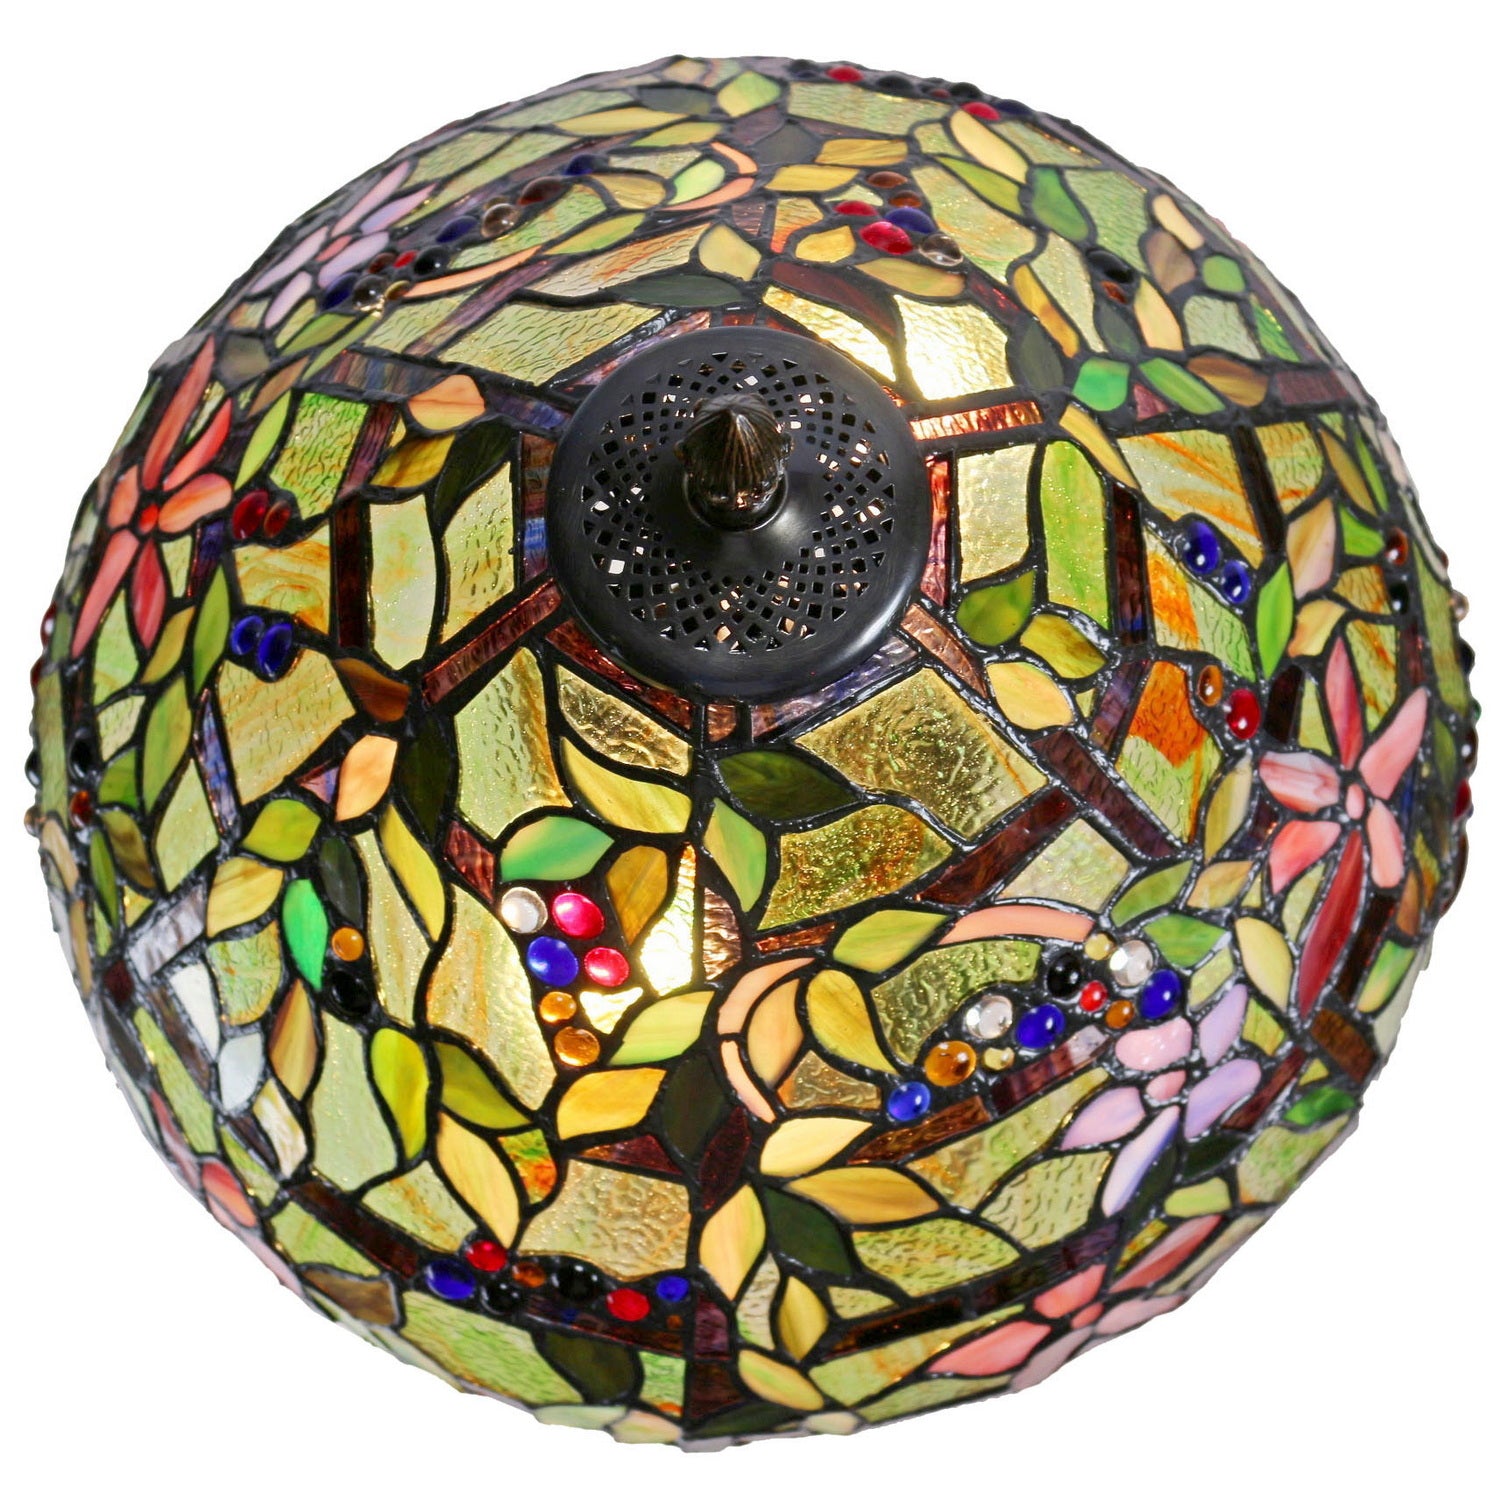 16" Large Clematis Flower Trellis Tiffany  Stained Class table Lamp